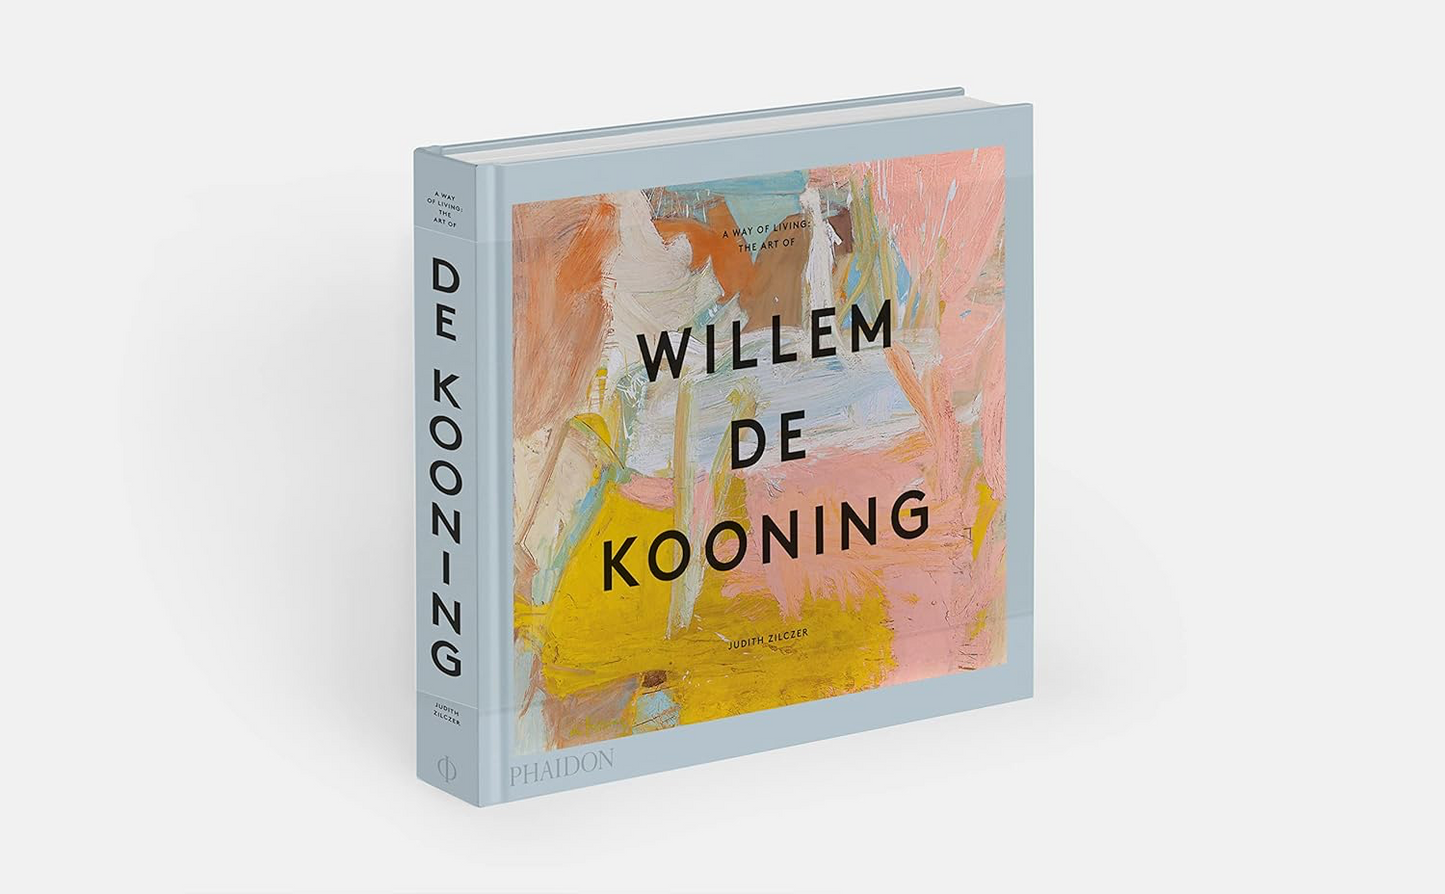 Large square book titled “A Way of Living: The Art of Willem de Kooning”